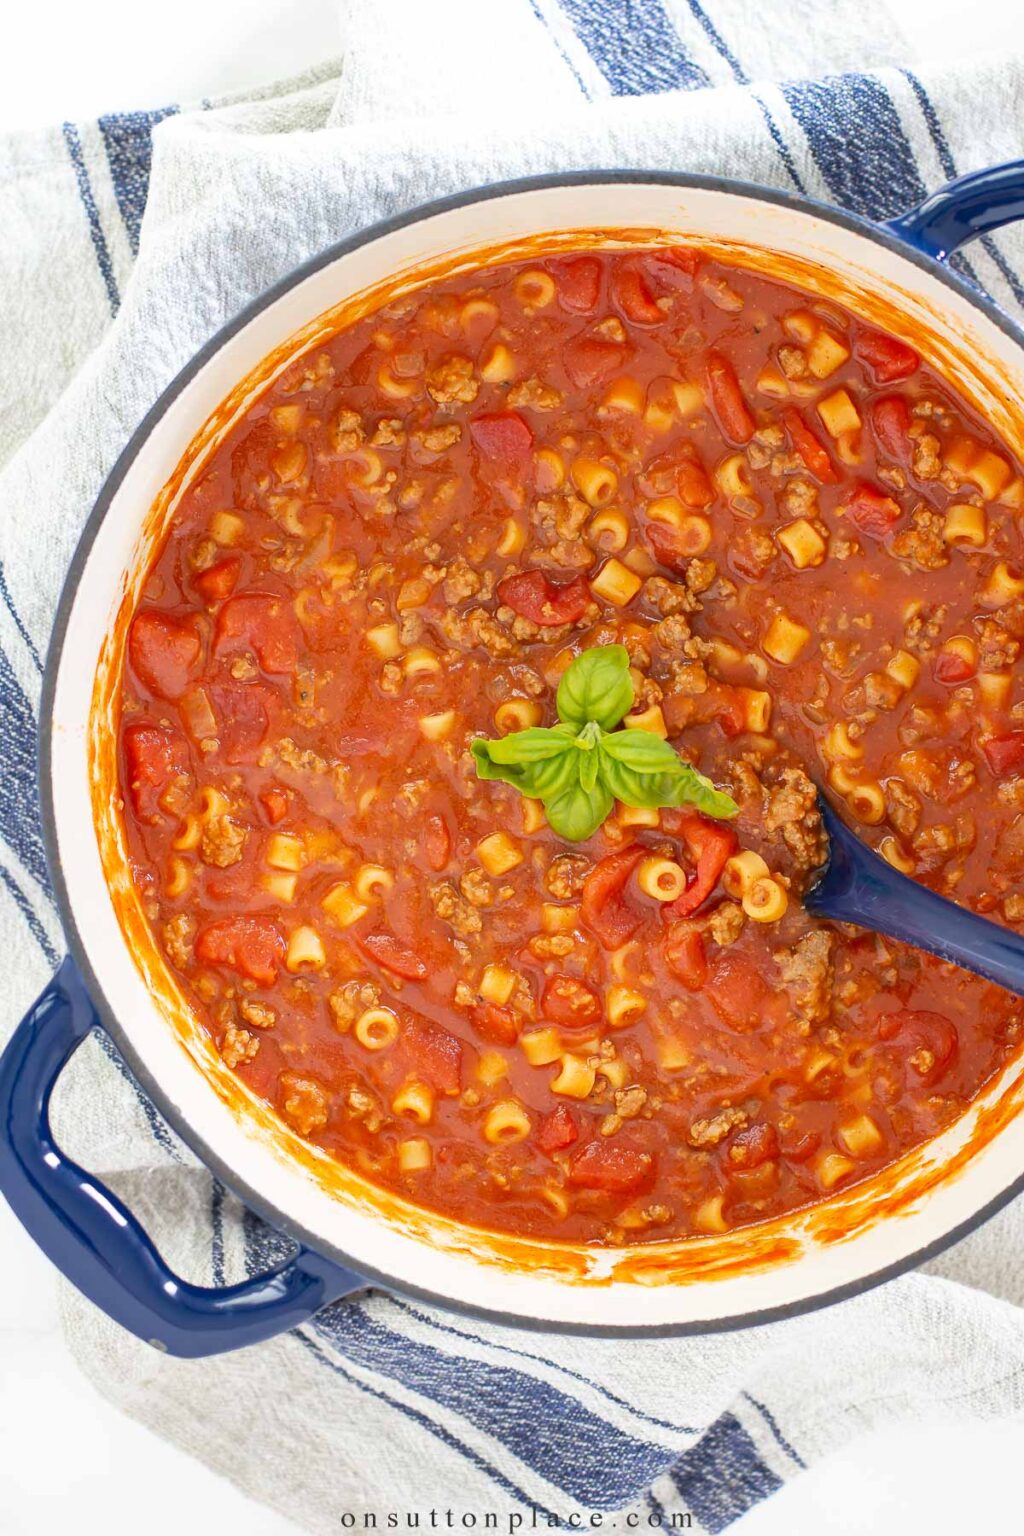 Chili Mac Recipe: A One Pot Dinner - On Sutton Place